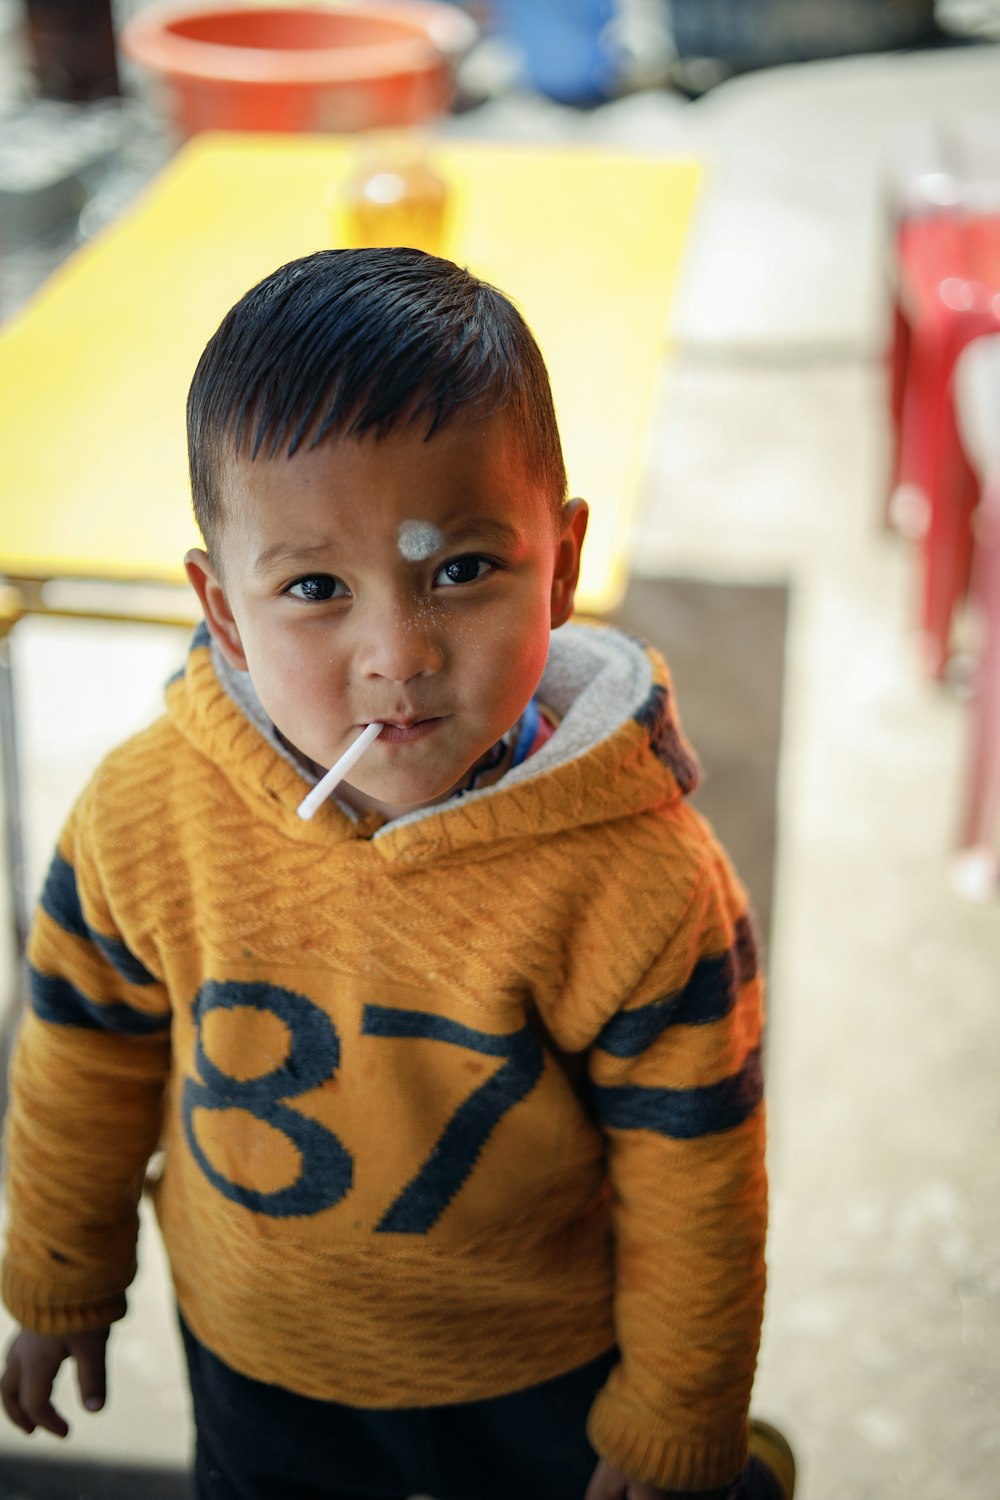 a child with a cigarette in his mouth